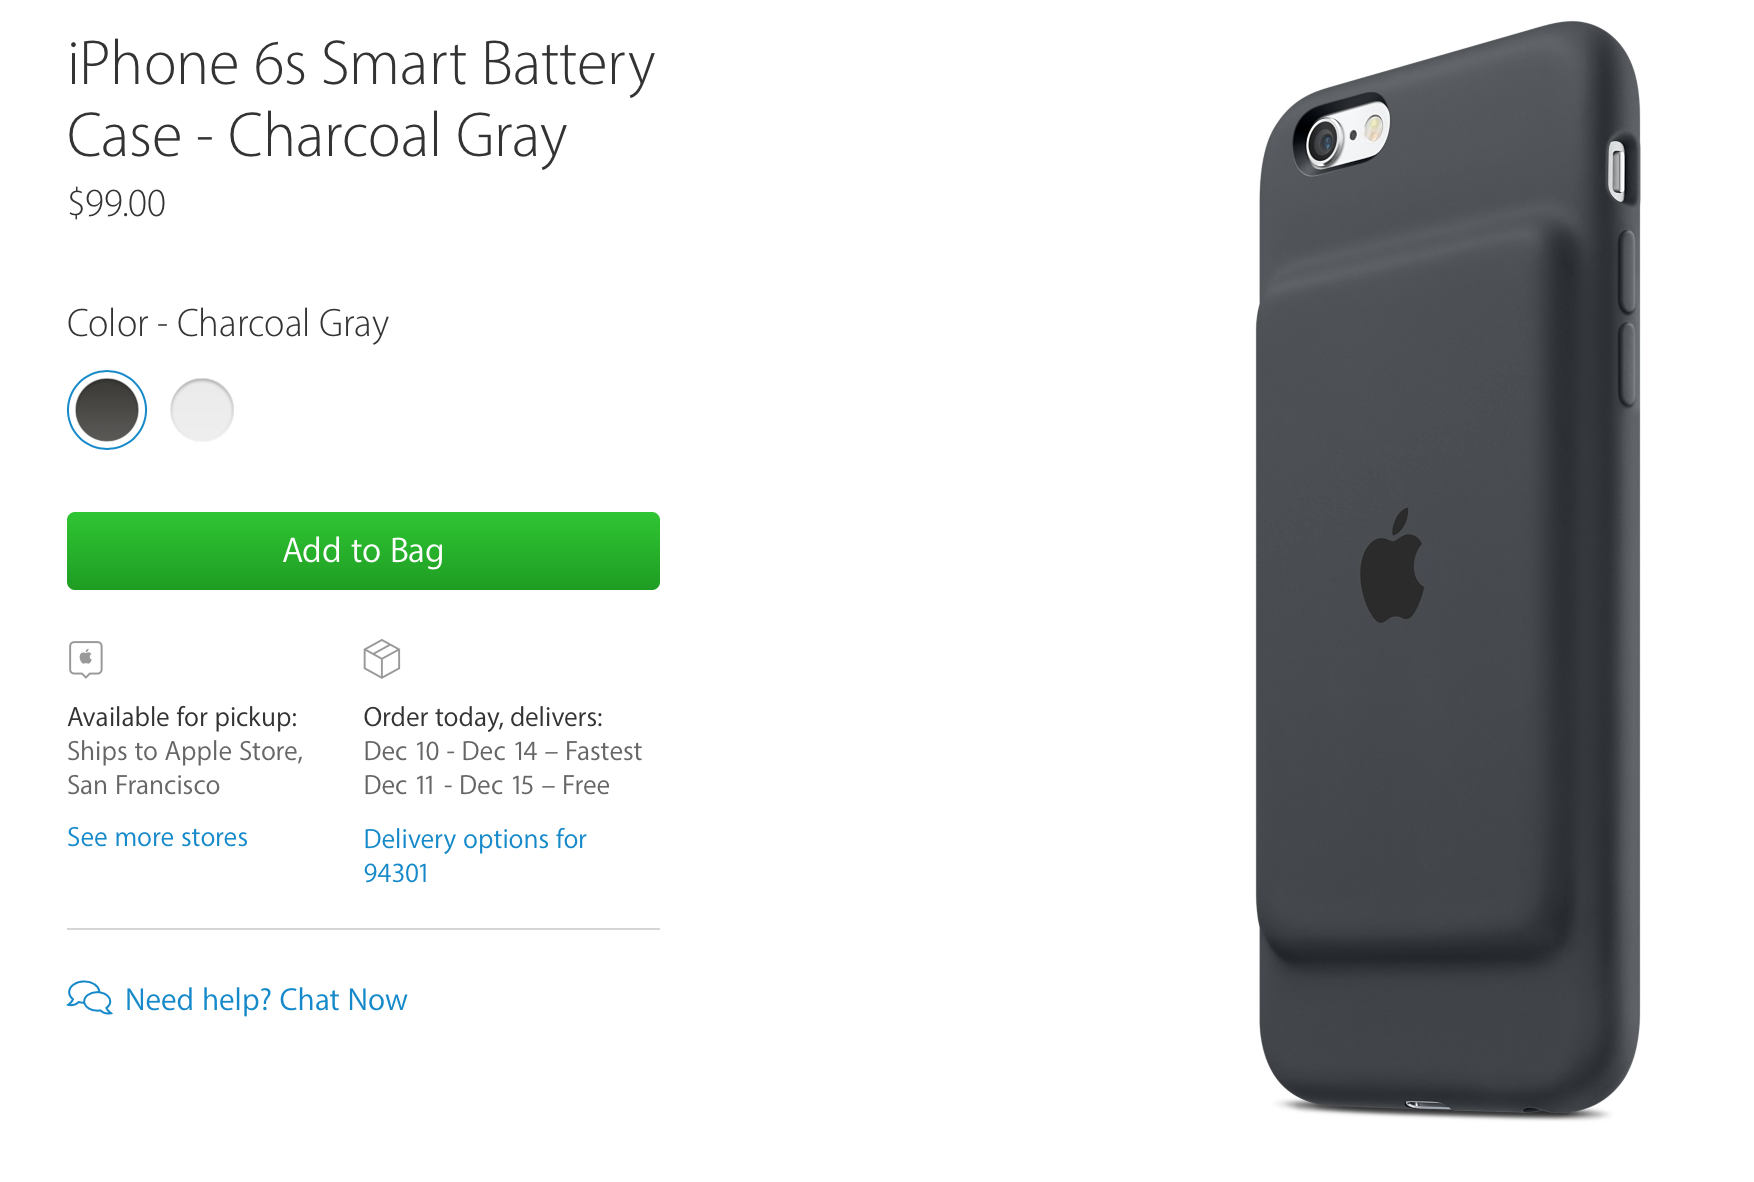 Apple releases $99 iPhone 6s Smart Battery Case, Apple's first battery pack iPhone case - 9to5Mac